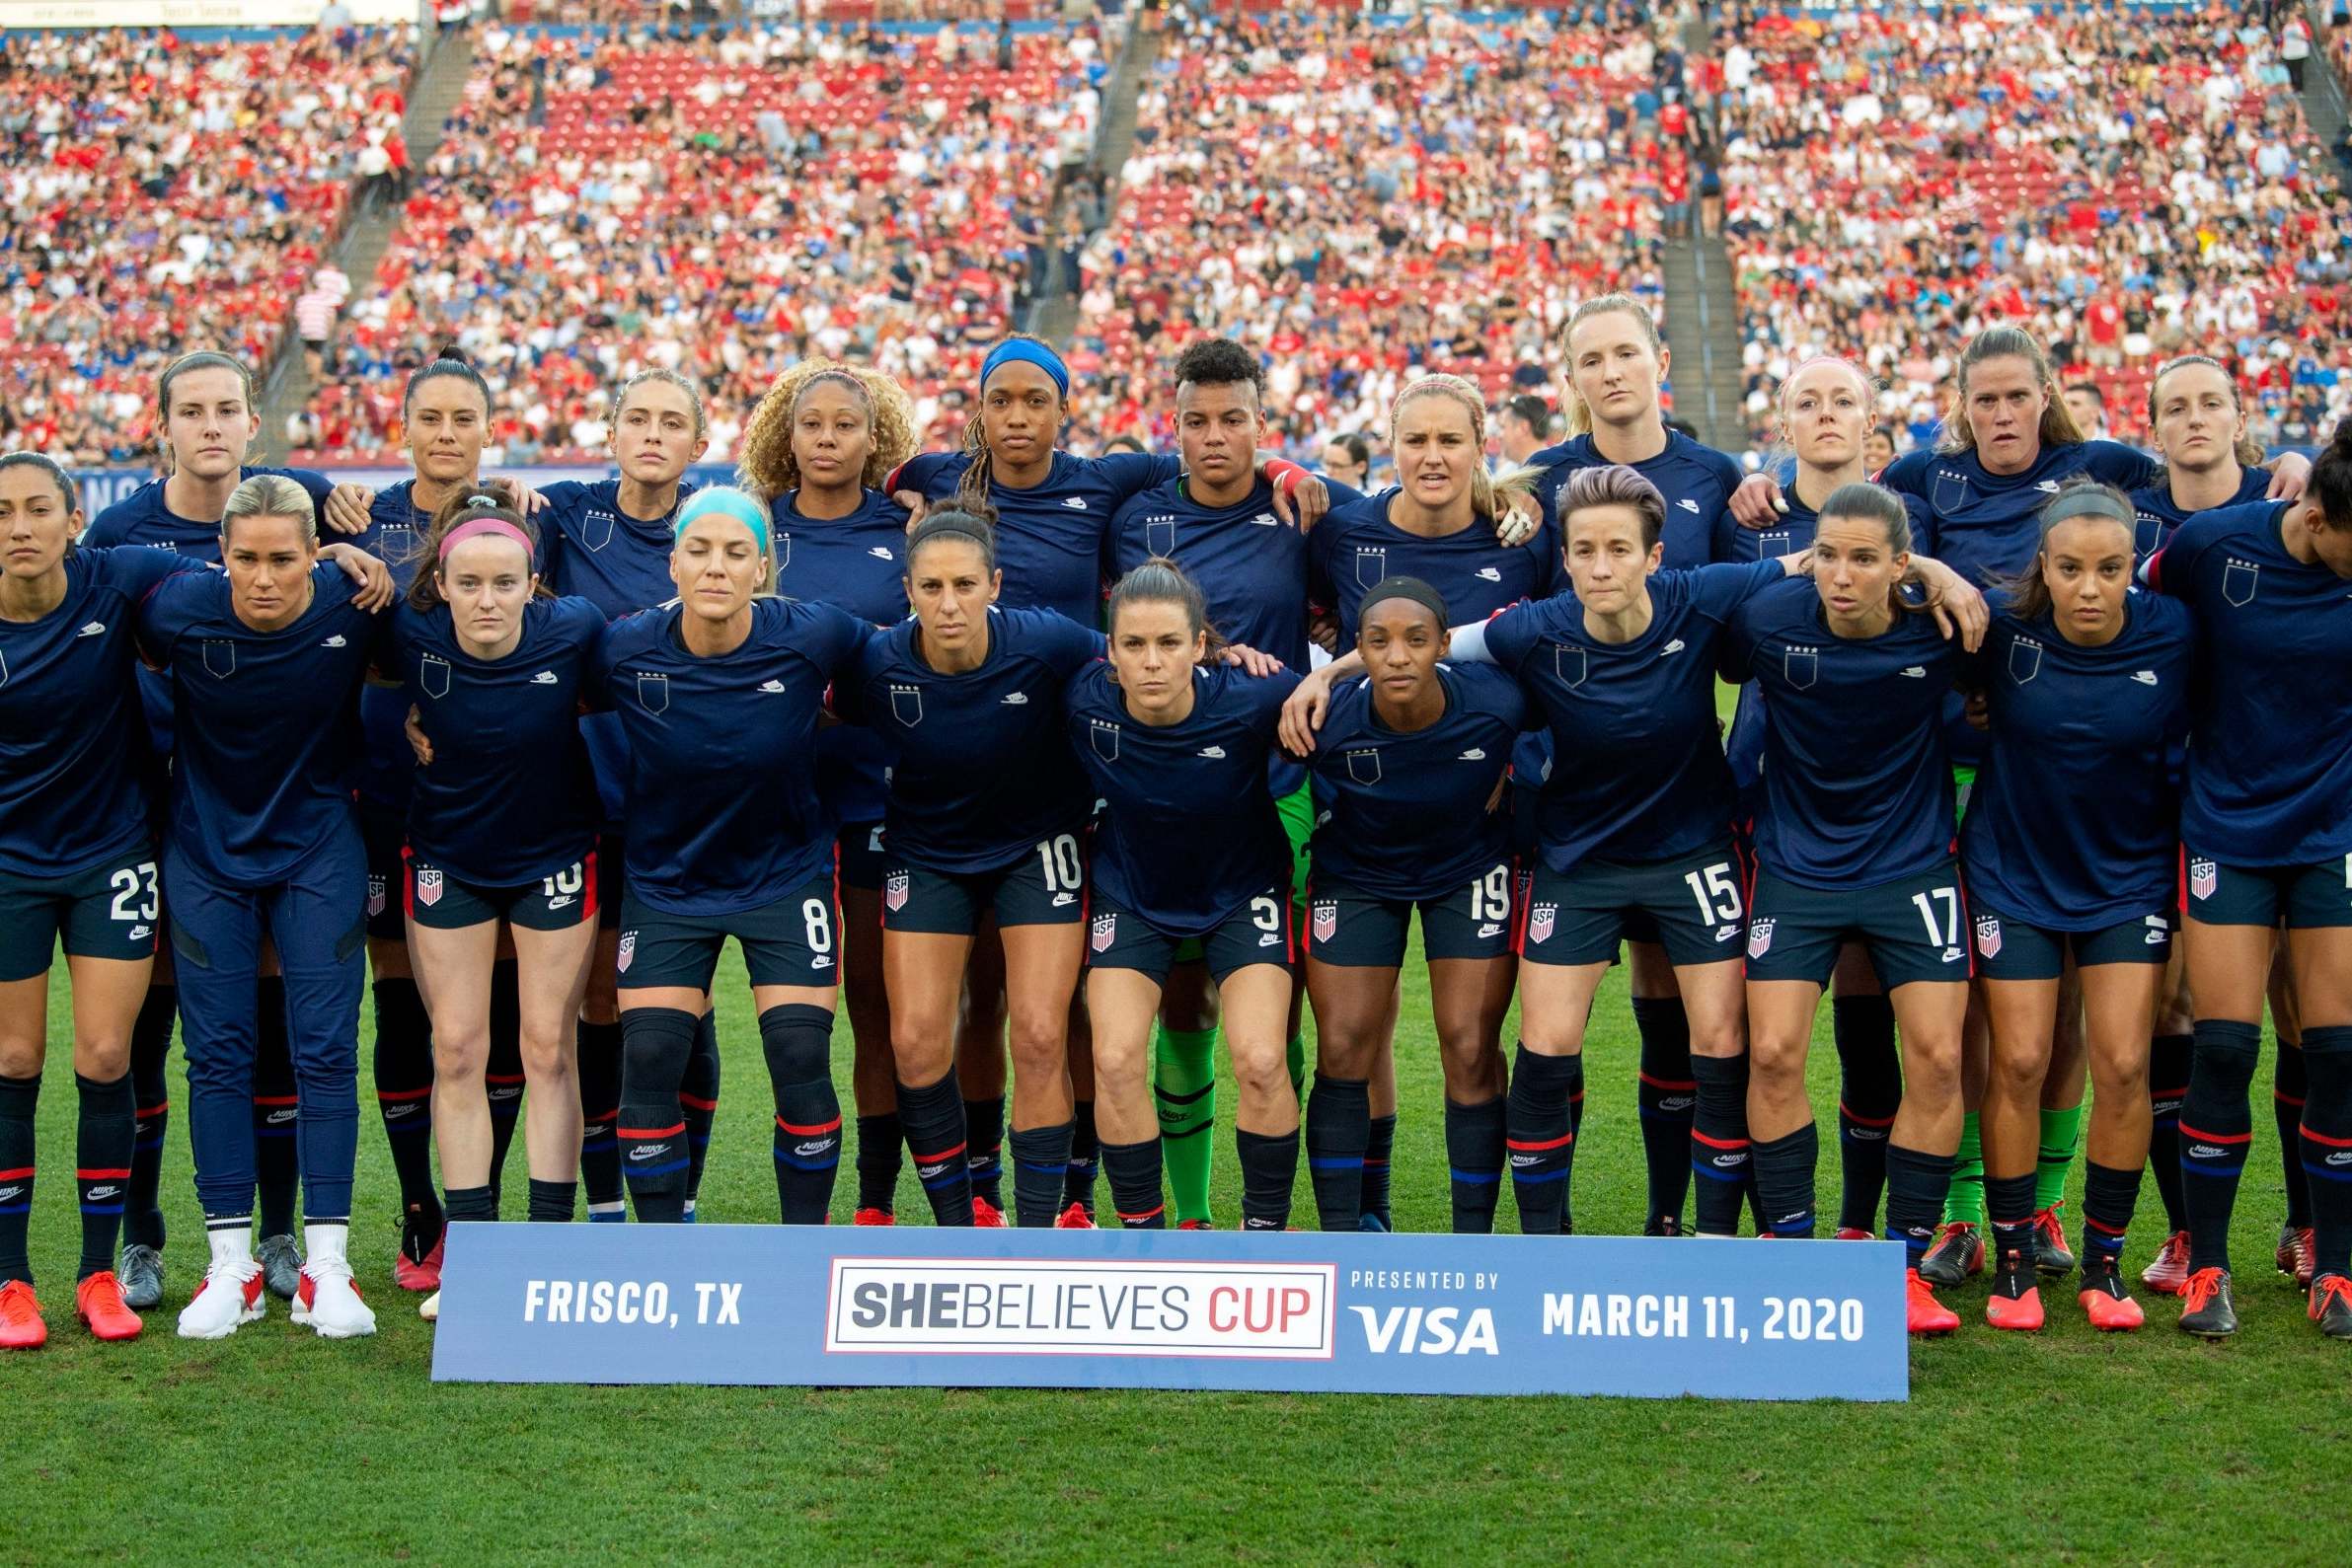 The US Women's team protested by wearing their shirts inside out